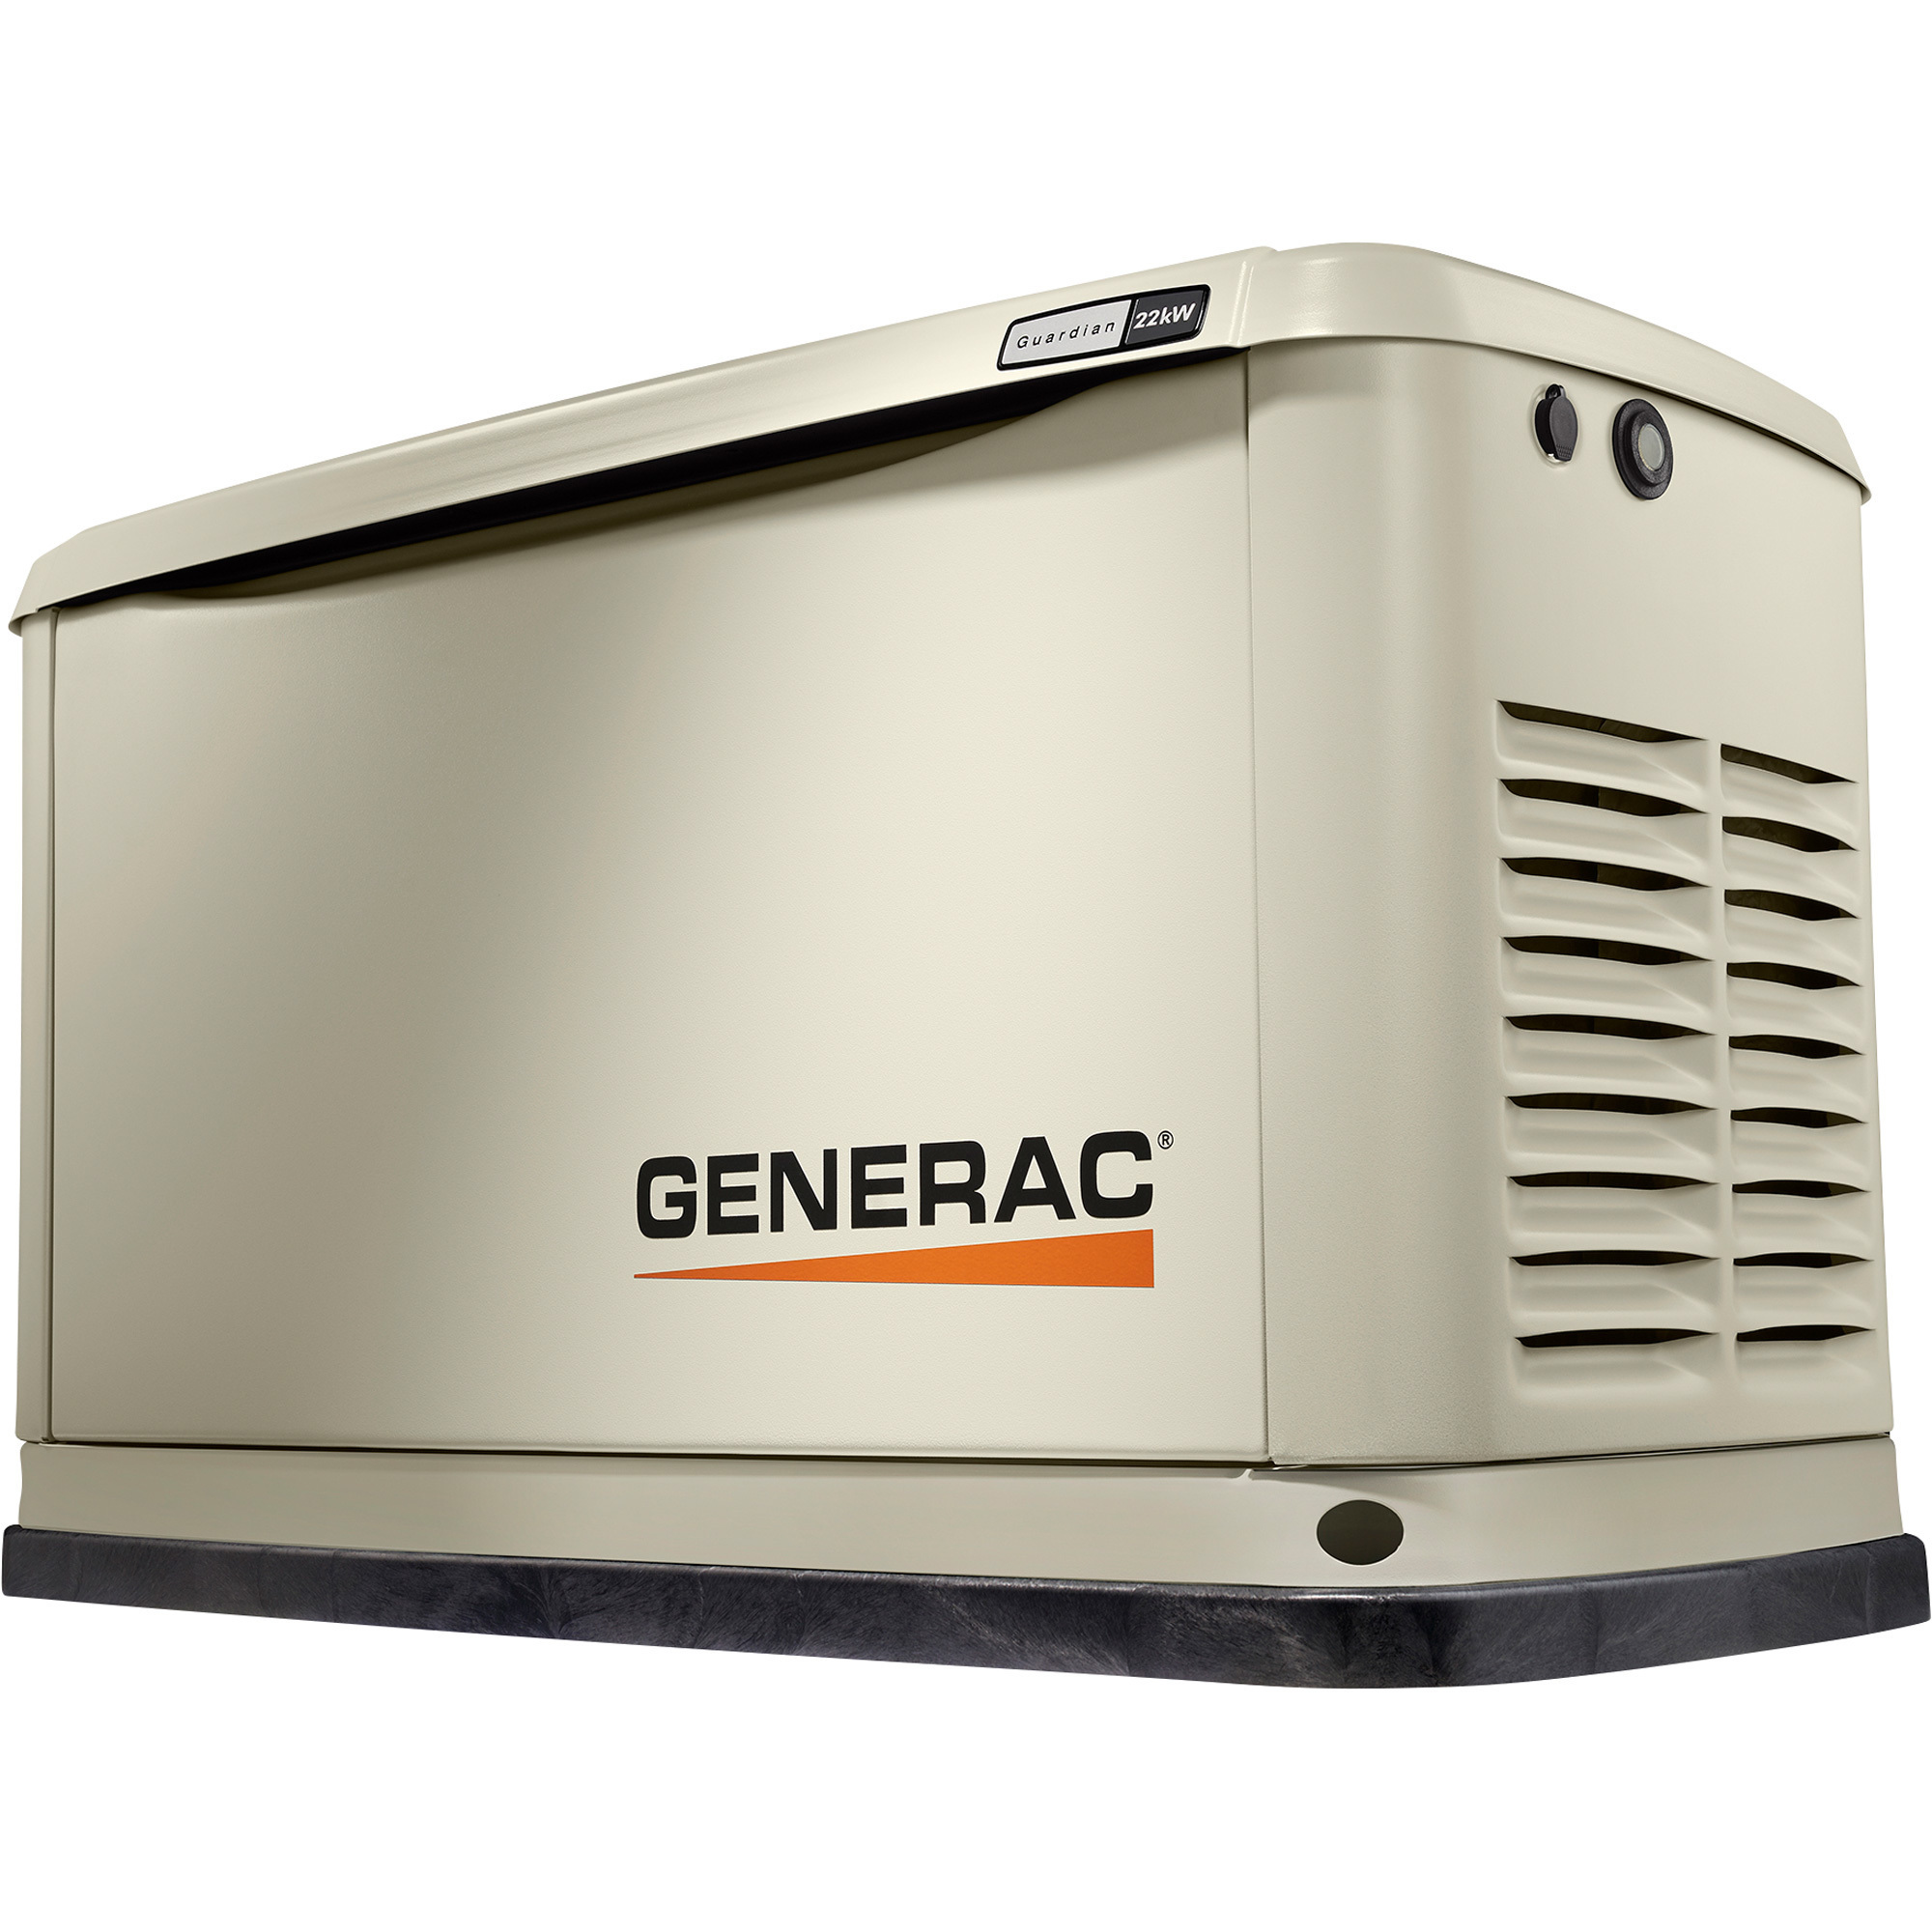 Generac 22 kW (LP)/19.5 kW (NG), Guardian Series Air-Cooled Home Standby Generator â200 Amp Transfer Switch, Model #7042